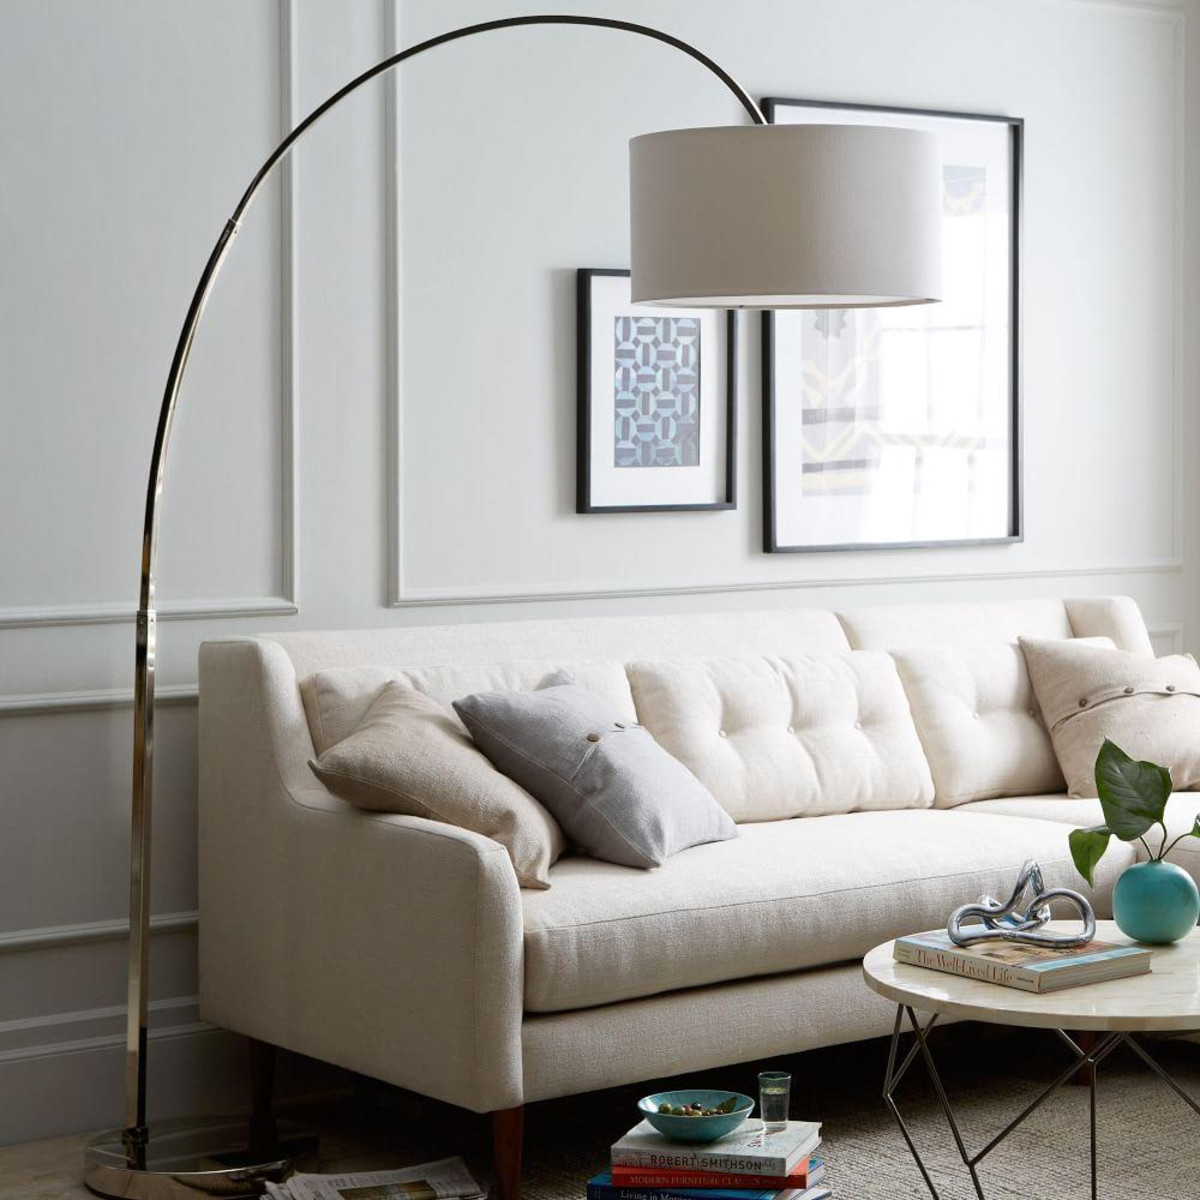 Overarching Floor Lamp Room Disacode Home Design From inside dimensions 1200 X 1200